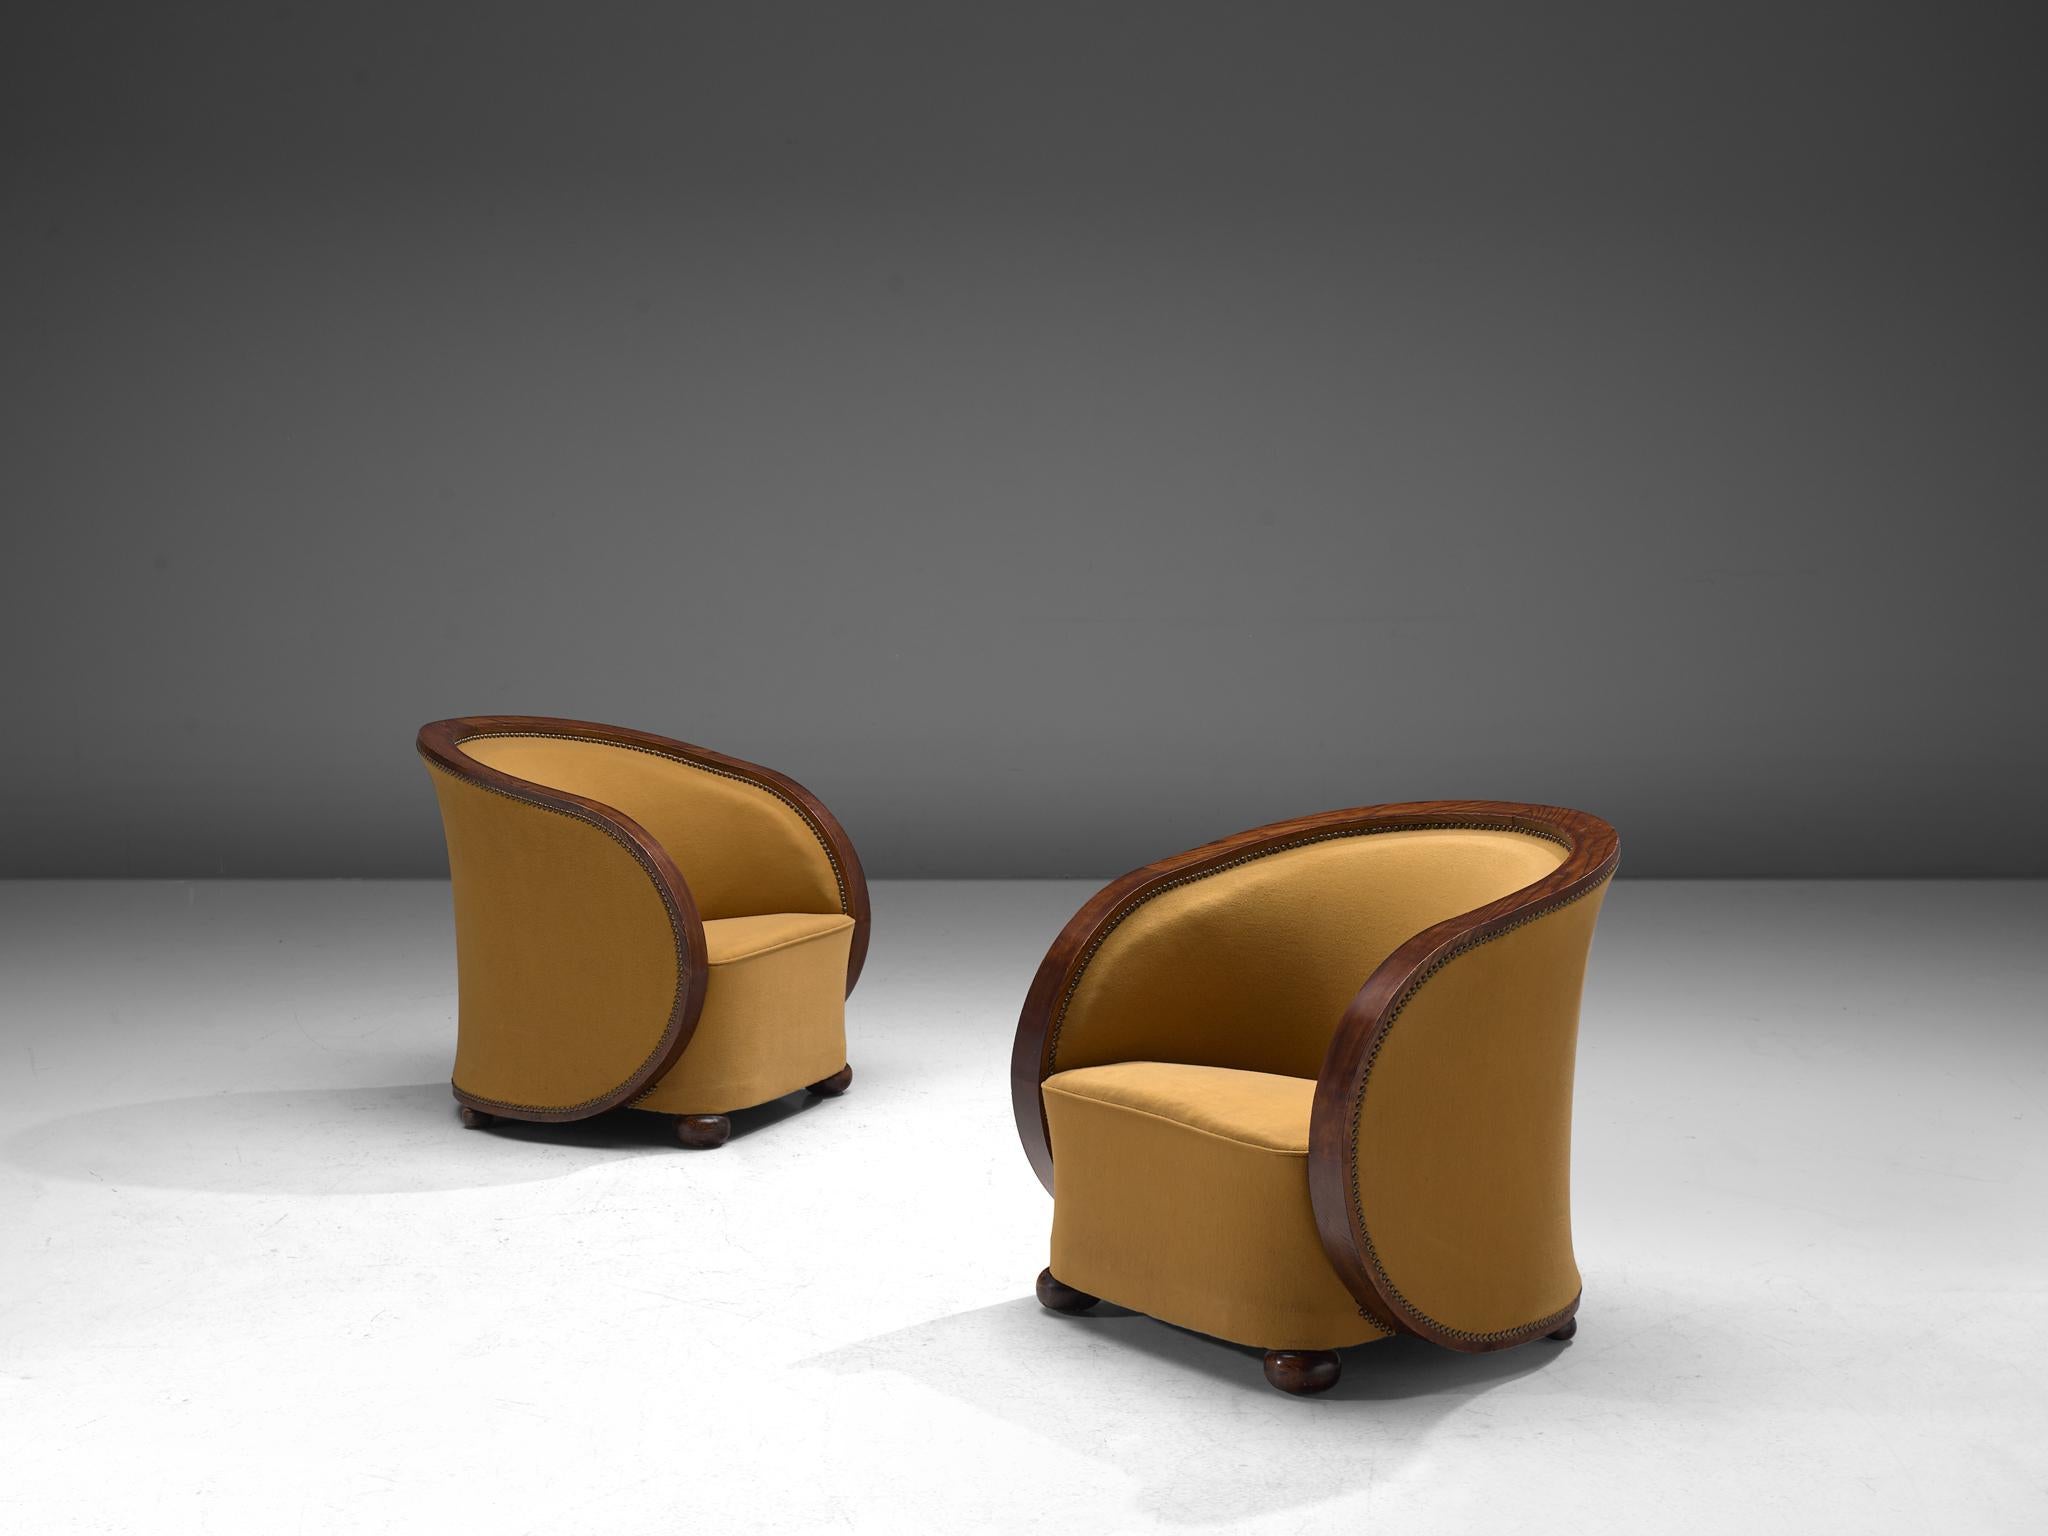 Pair of lounge chairs, wood and fabric, France, 1940s.

Beautifully Art Deco club chairs made from bentwood and fabric. The chairs have an elegant, almost theatrical appearance thanks to its round forms, emphasized by the wooden curved slat that is